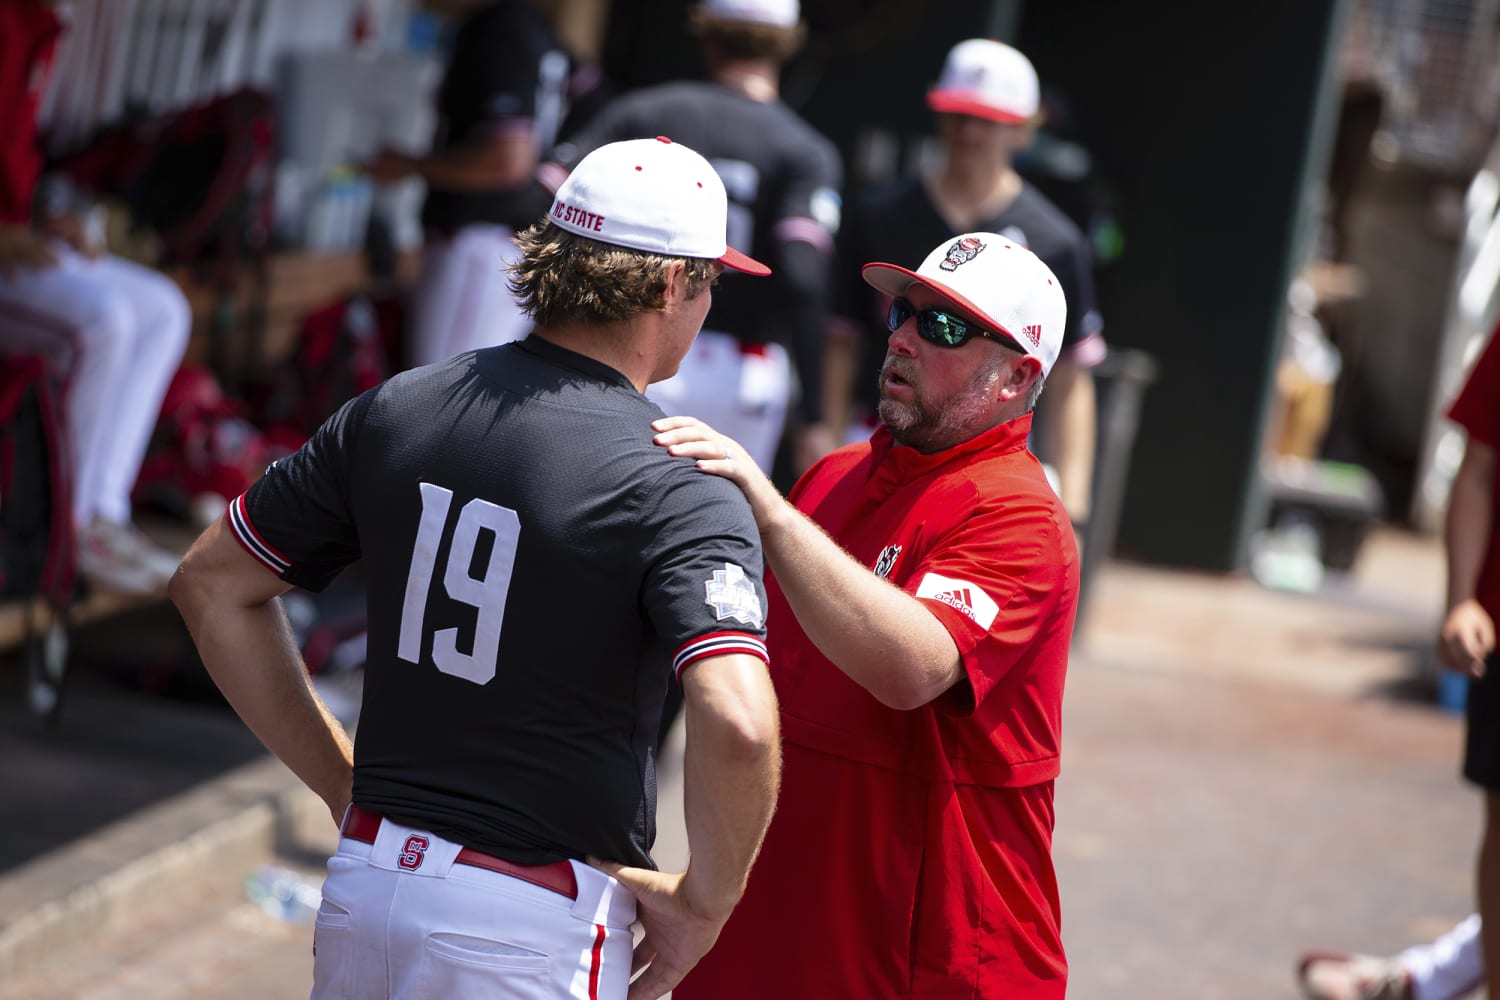 N.C. State out of College World Series because of Covid 8 issues ...